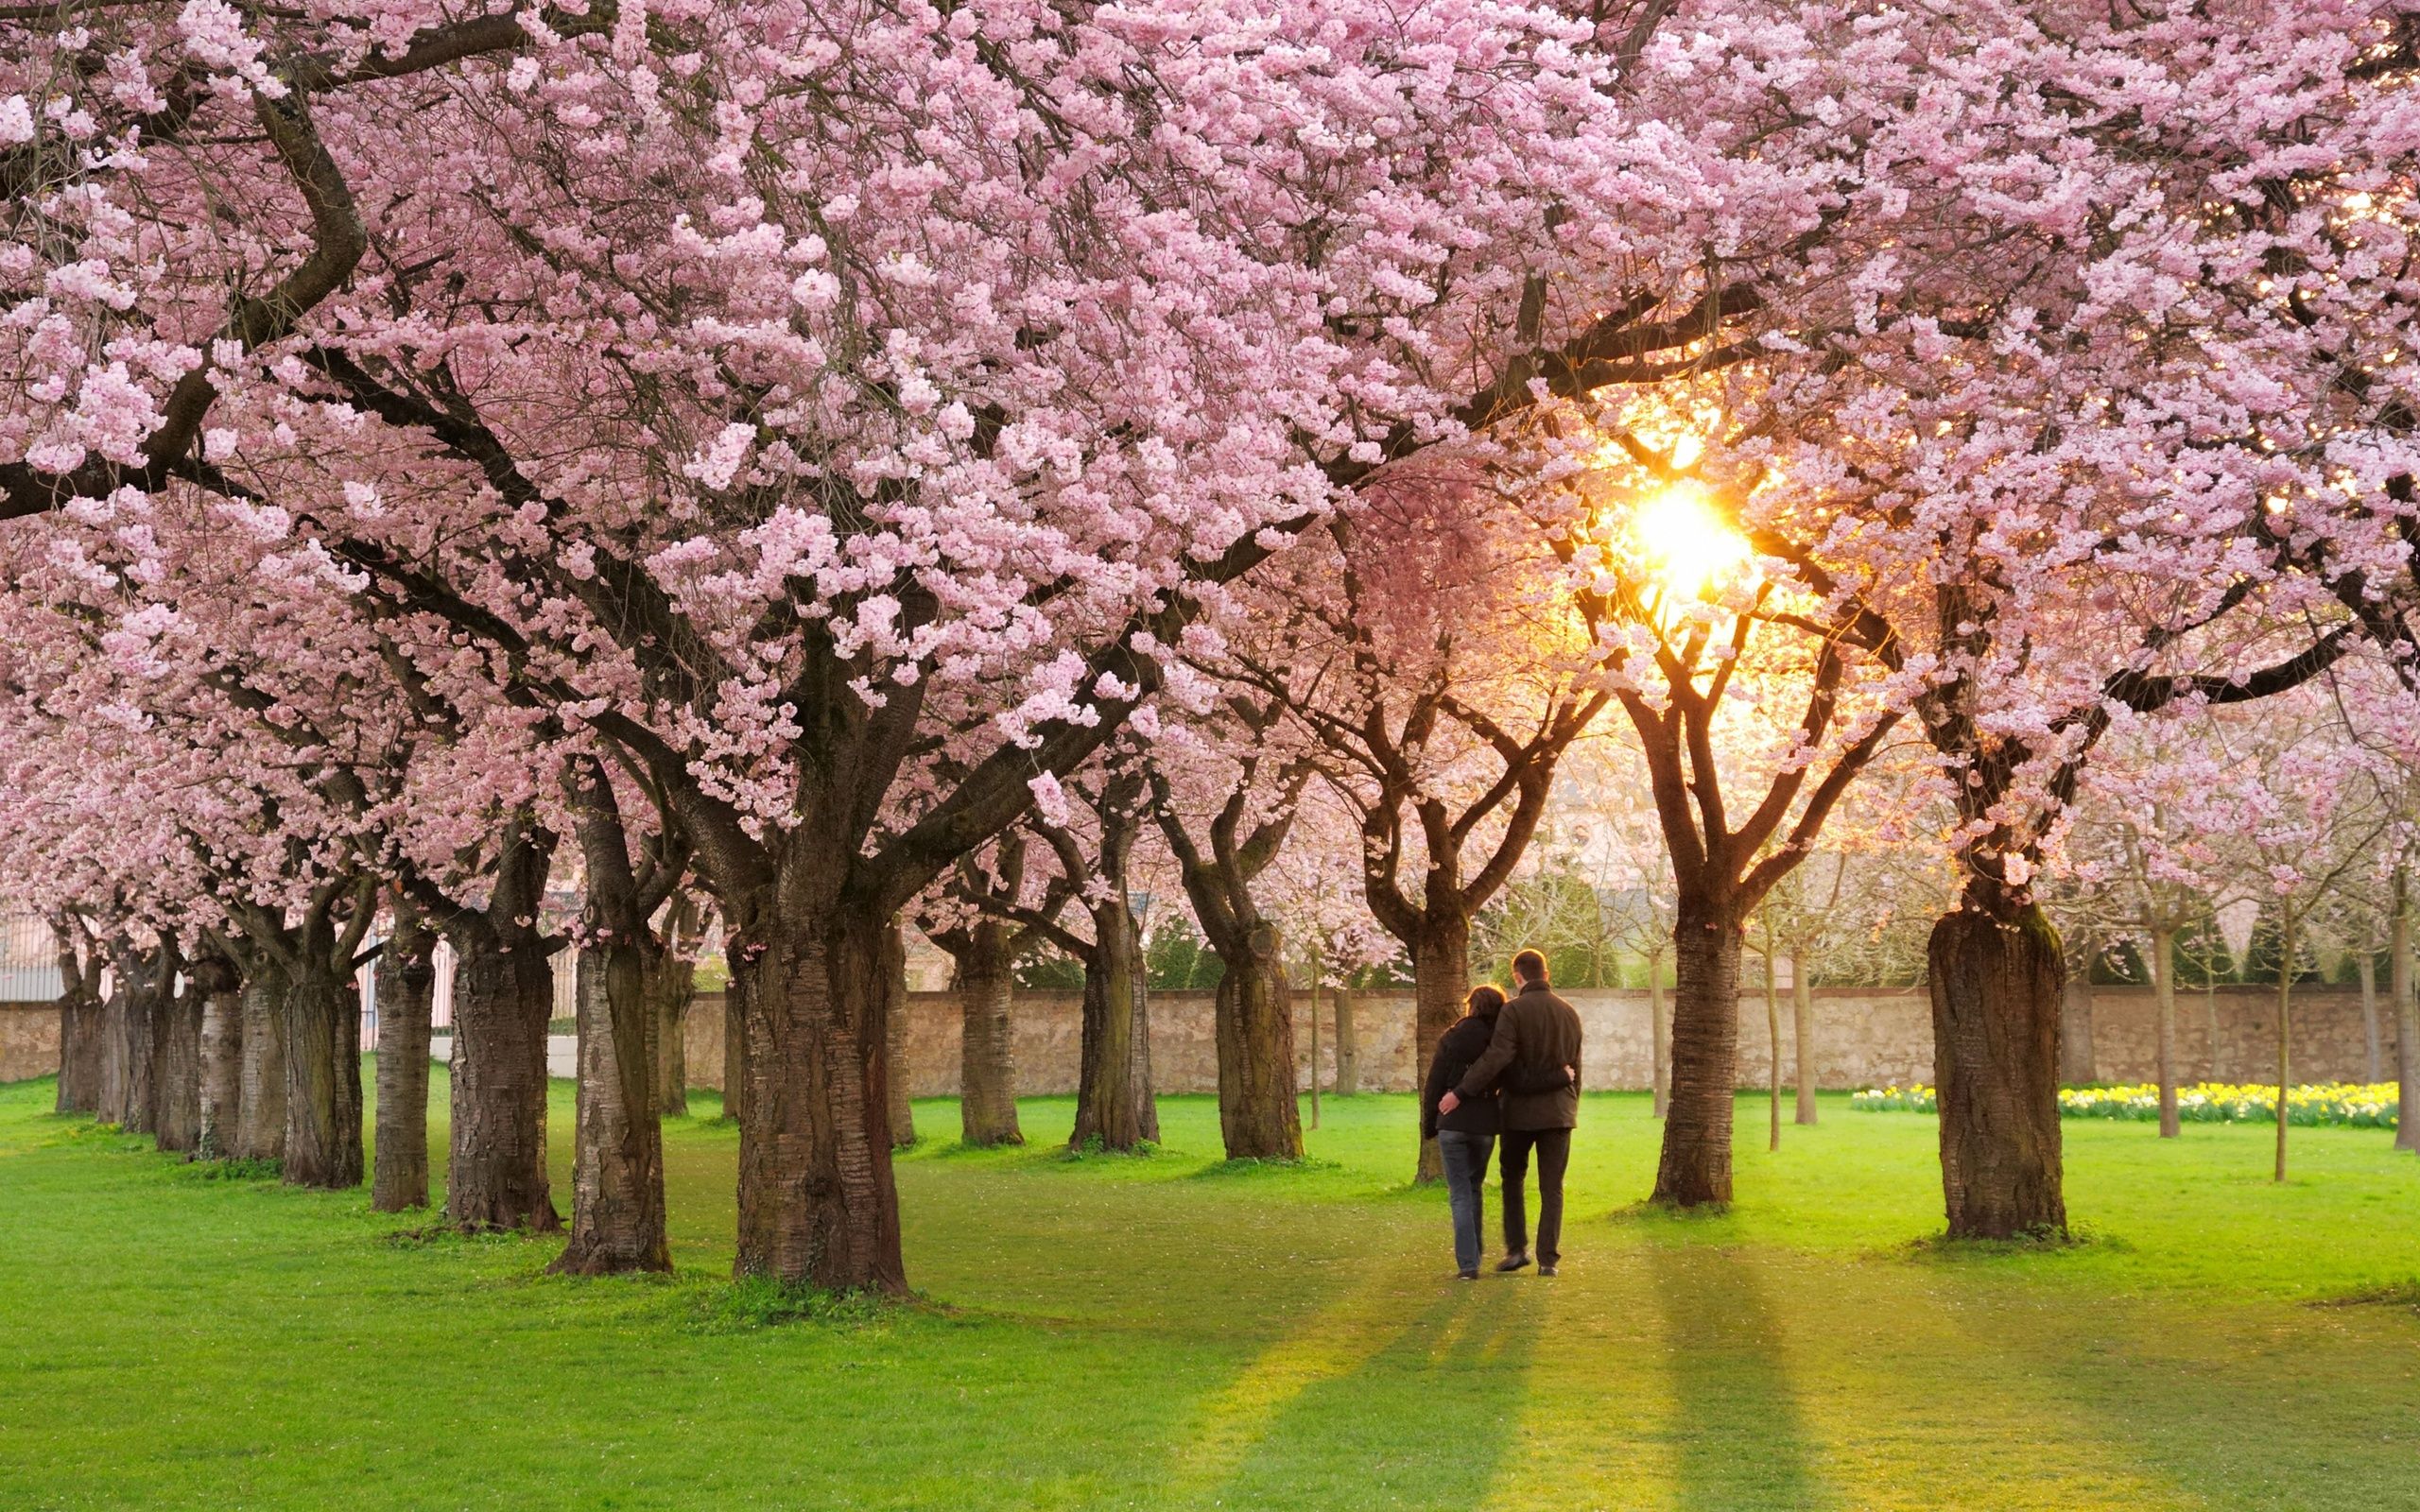 Beautiful Spring images download | Wallpapers, Backgrounds, Images ...